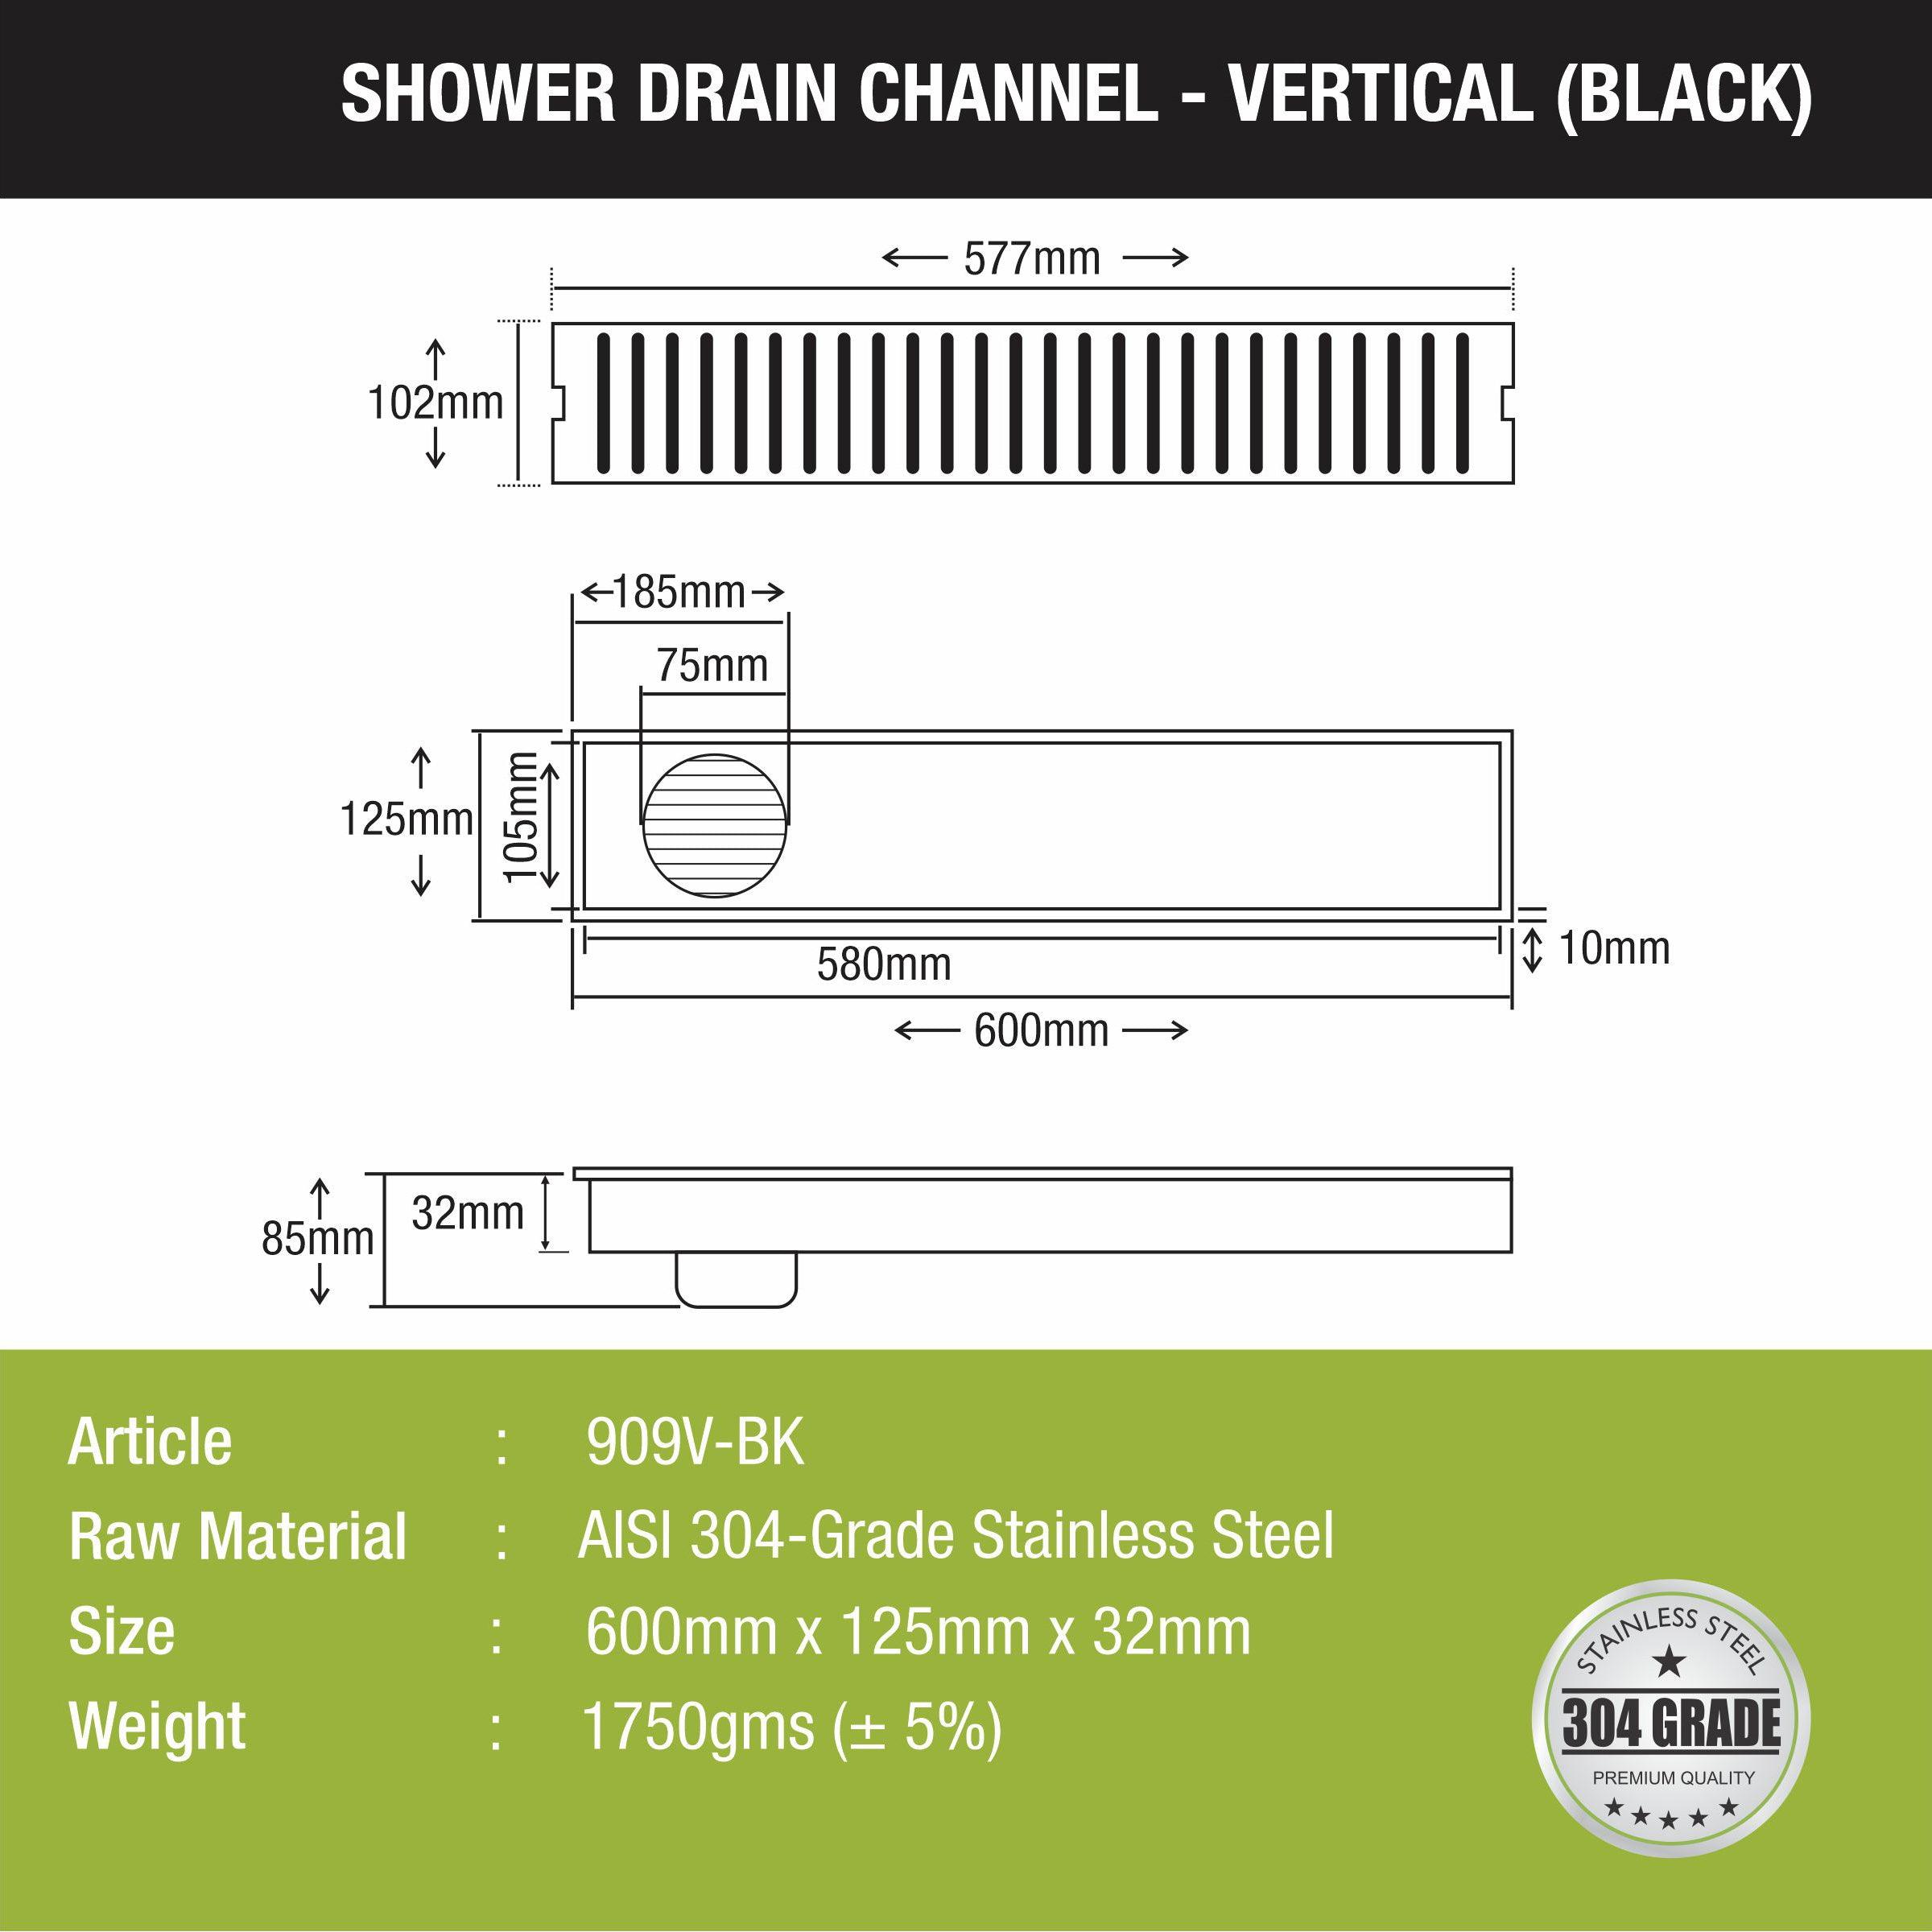 Vertical Shower Drain Channel - Black (24 x 5 Inches) size and measurement